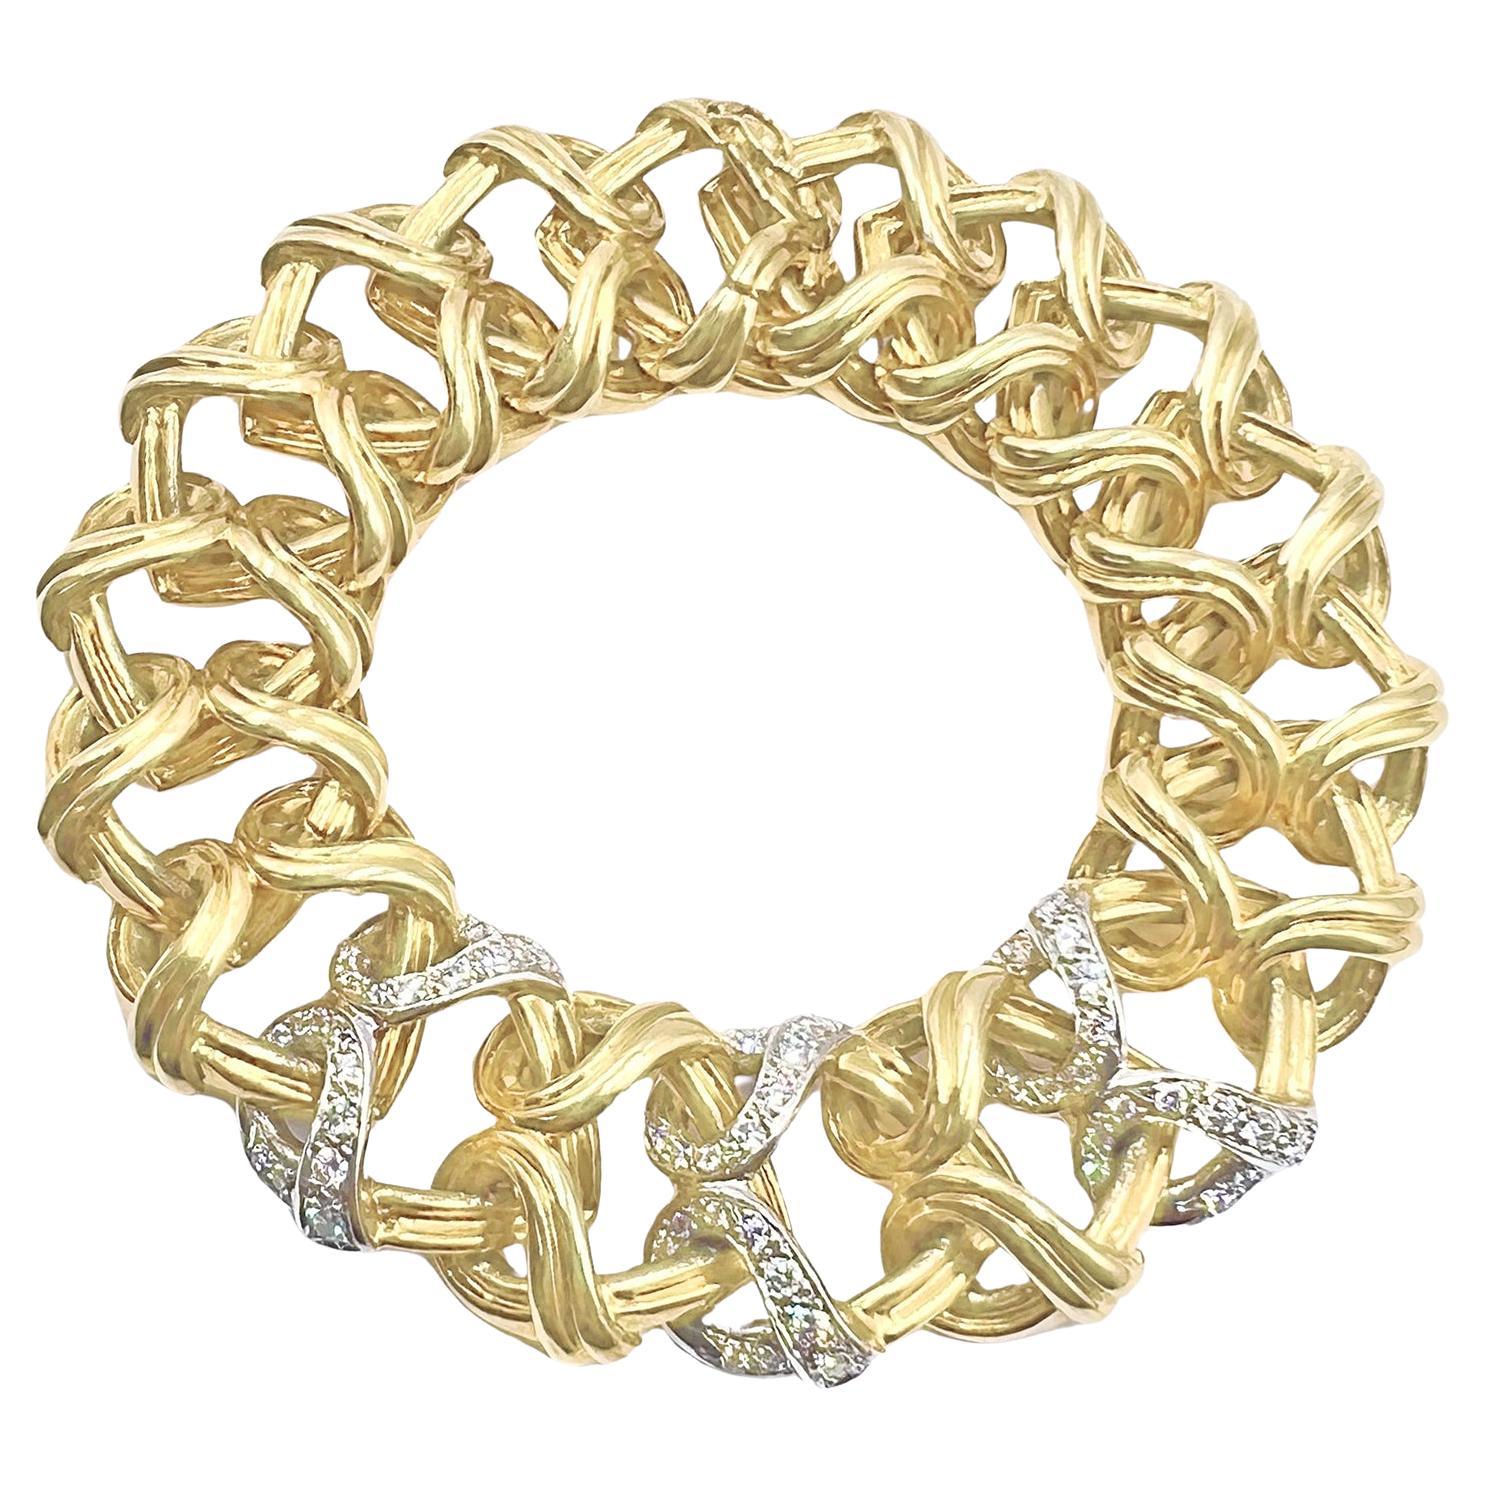 Verdura heart link bracelet in 18k yellow gold, comprised of seventeen interlocking open heart links with a polished finish.  The center is fashioned with three platinum loop sections accented by fifty-four round brilliant-cut diamonds weighing